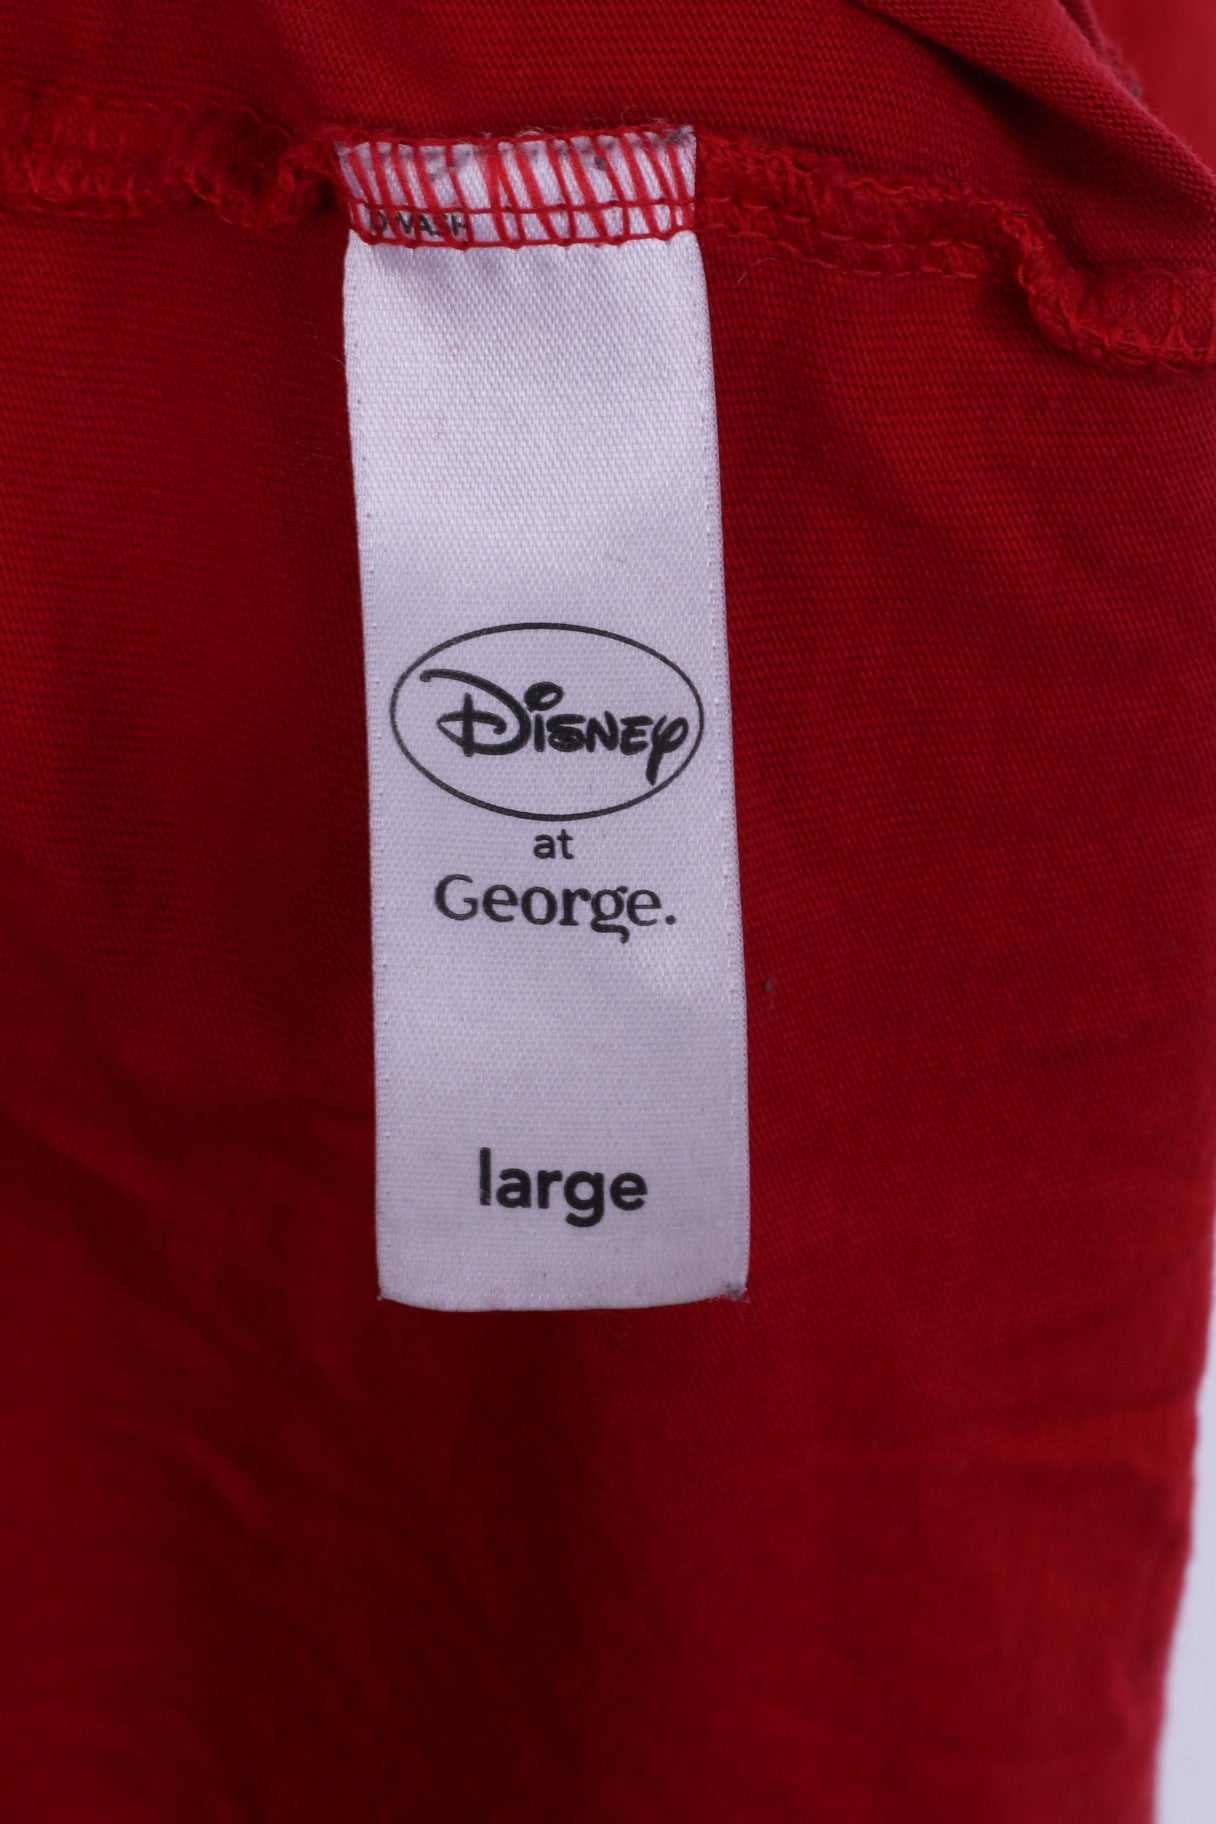 Disney at George Mens S Graphic T-Shirt Crew Neck Red I Owe It's Off To Work We Go!